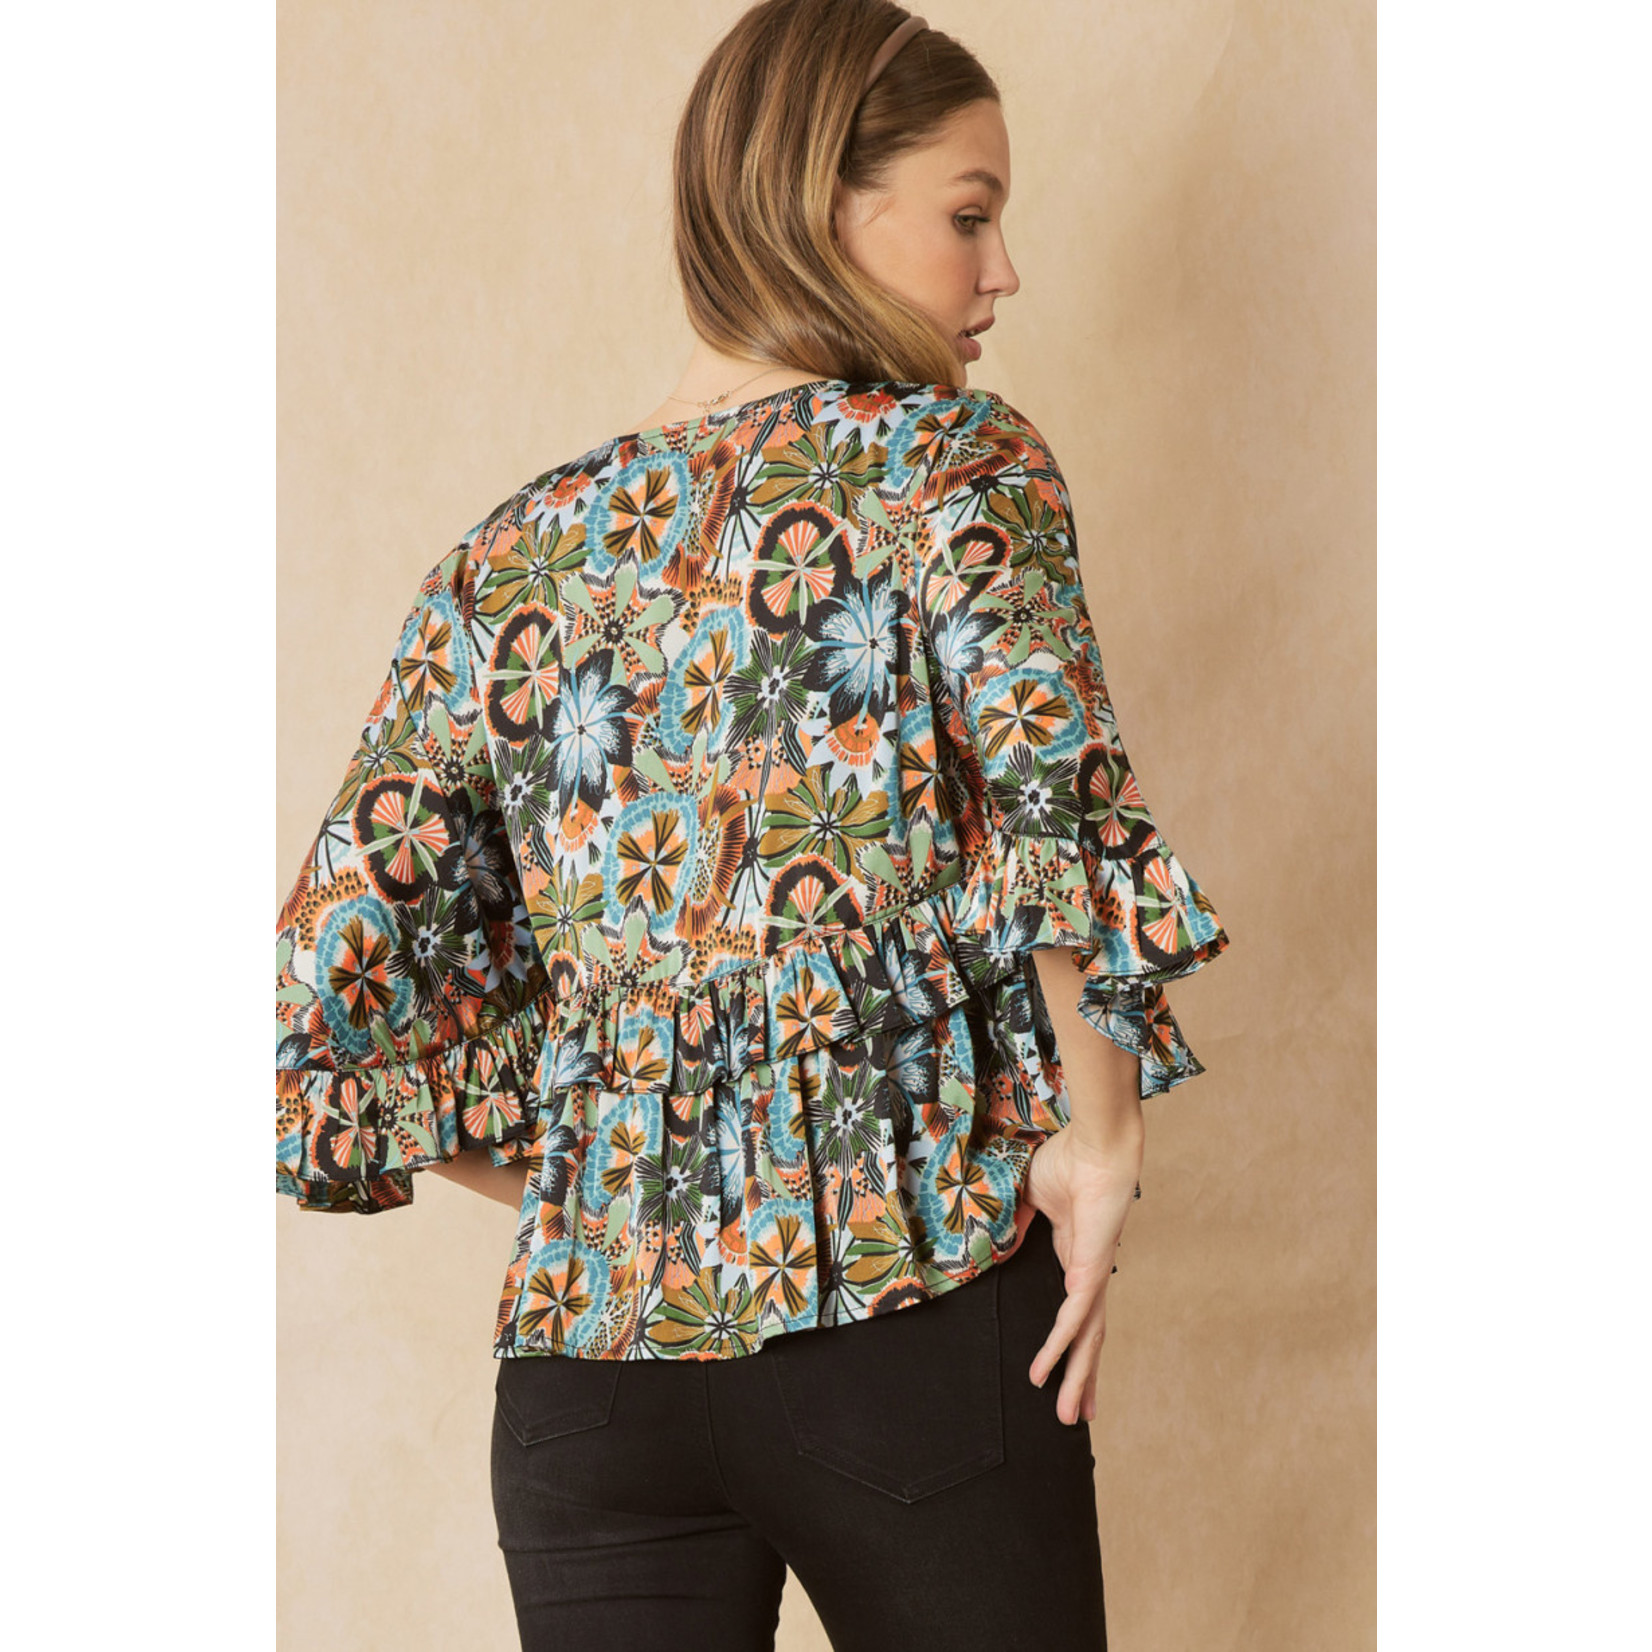 The Donna Floral Print Top